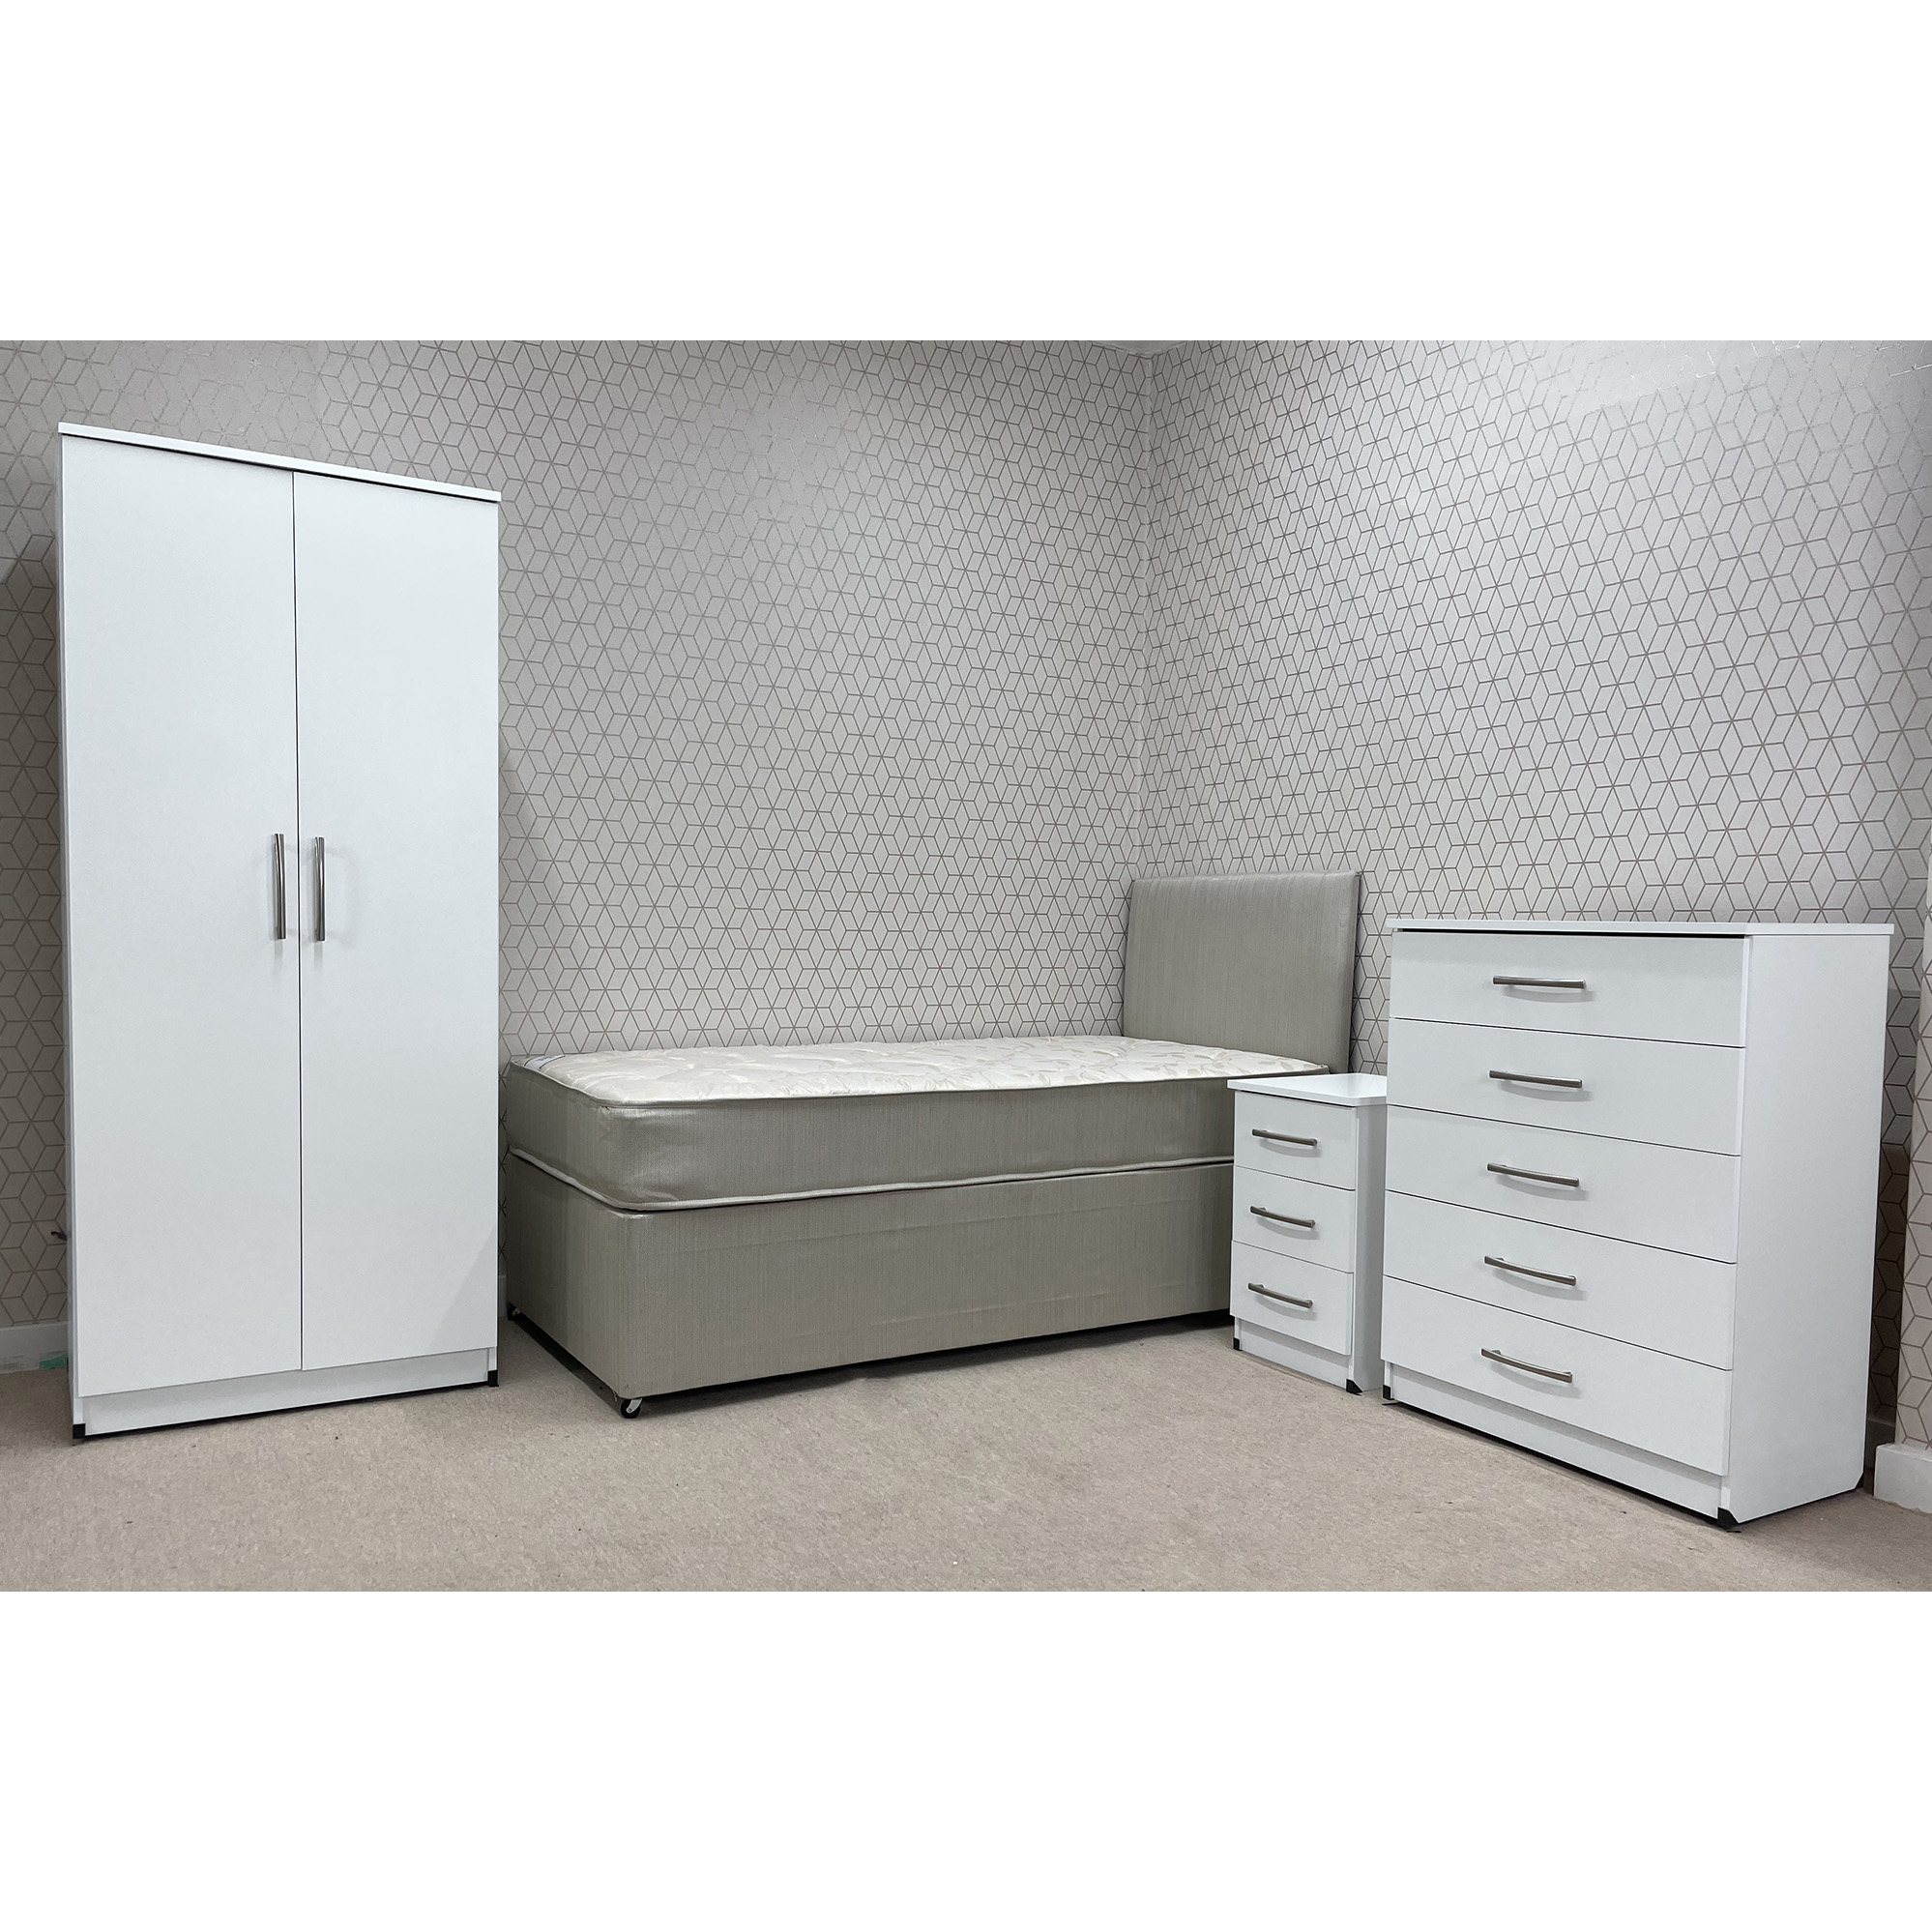 hmo furniture package landlord furniture package 1s